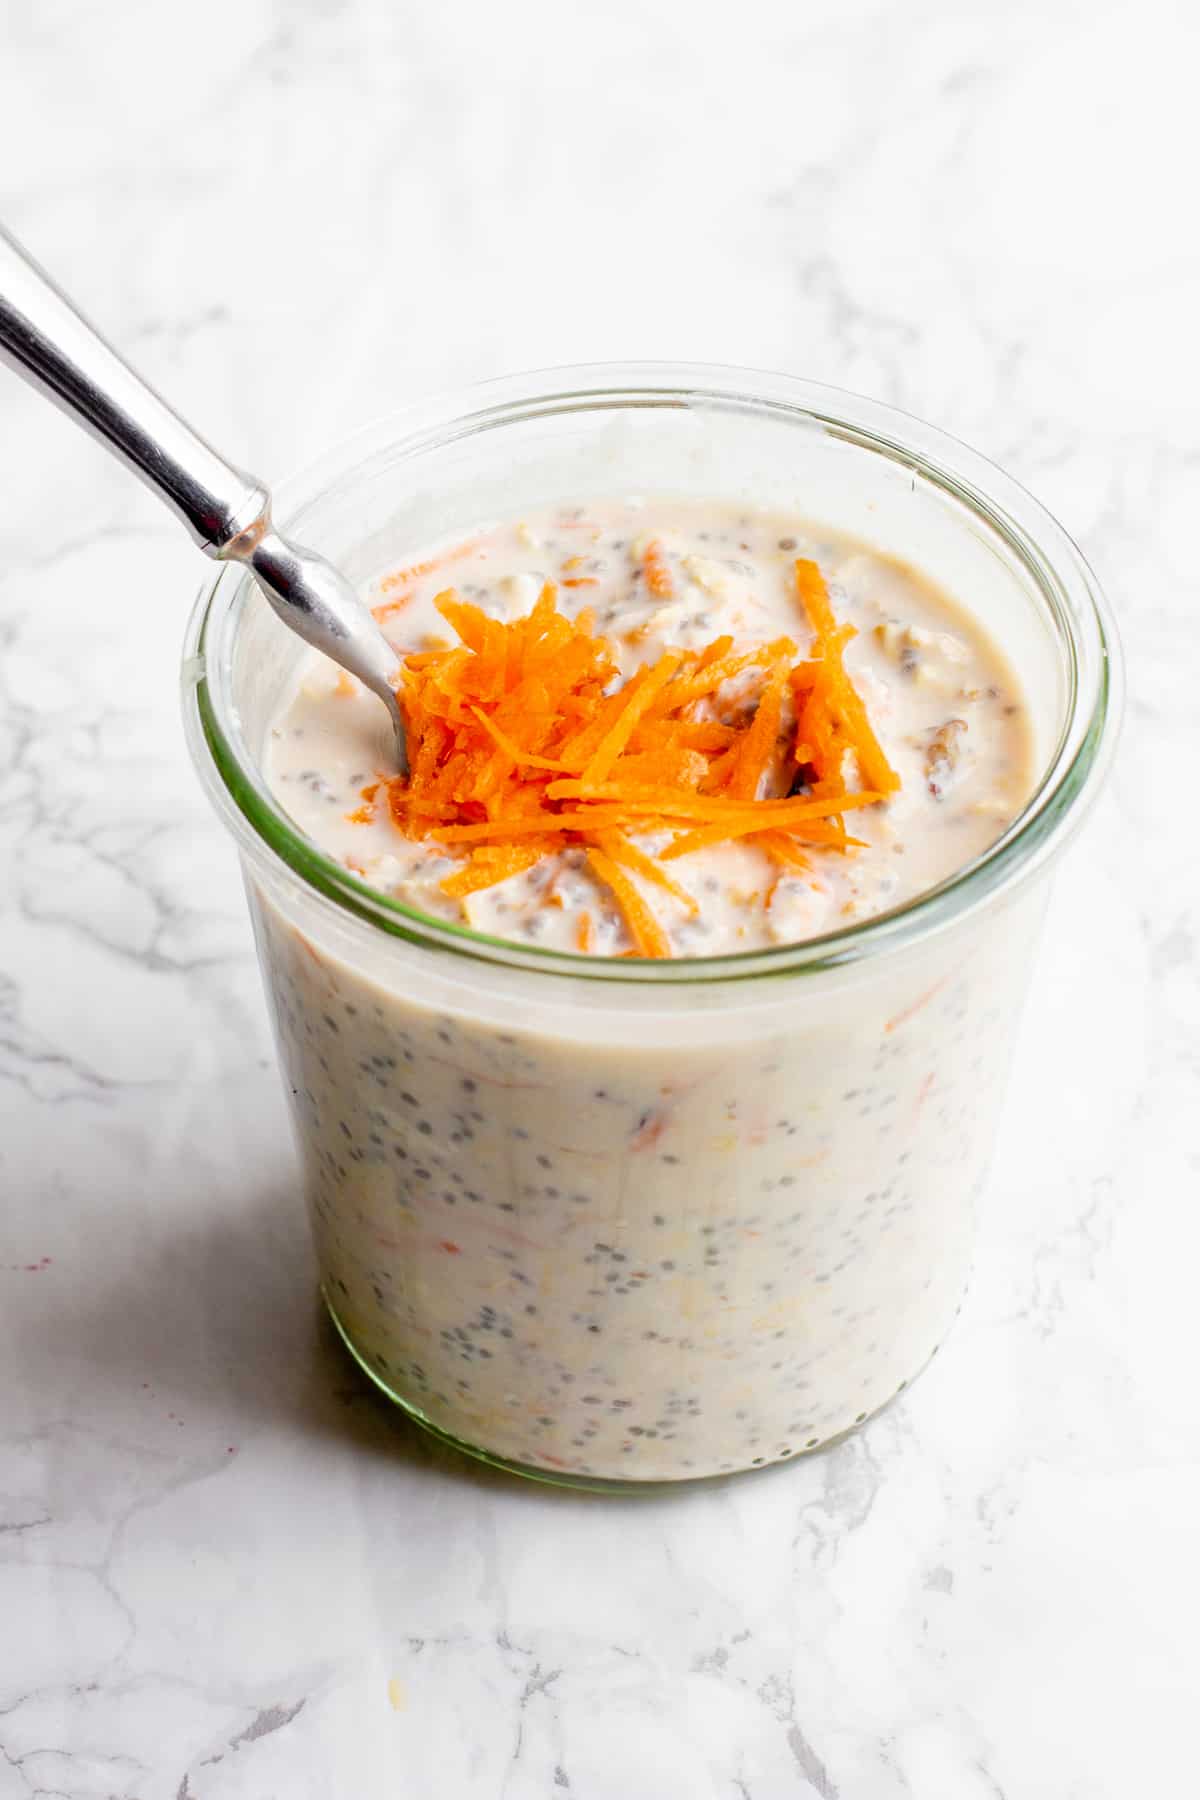 A glass jar filled with carrot cake overnight oats sits on a marble countertop. The oats are garnished with shredded carrots, and a spoon dips into the jar.